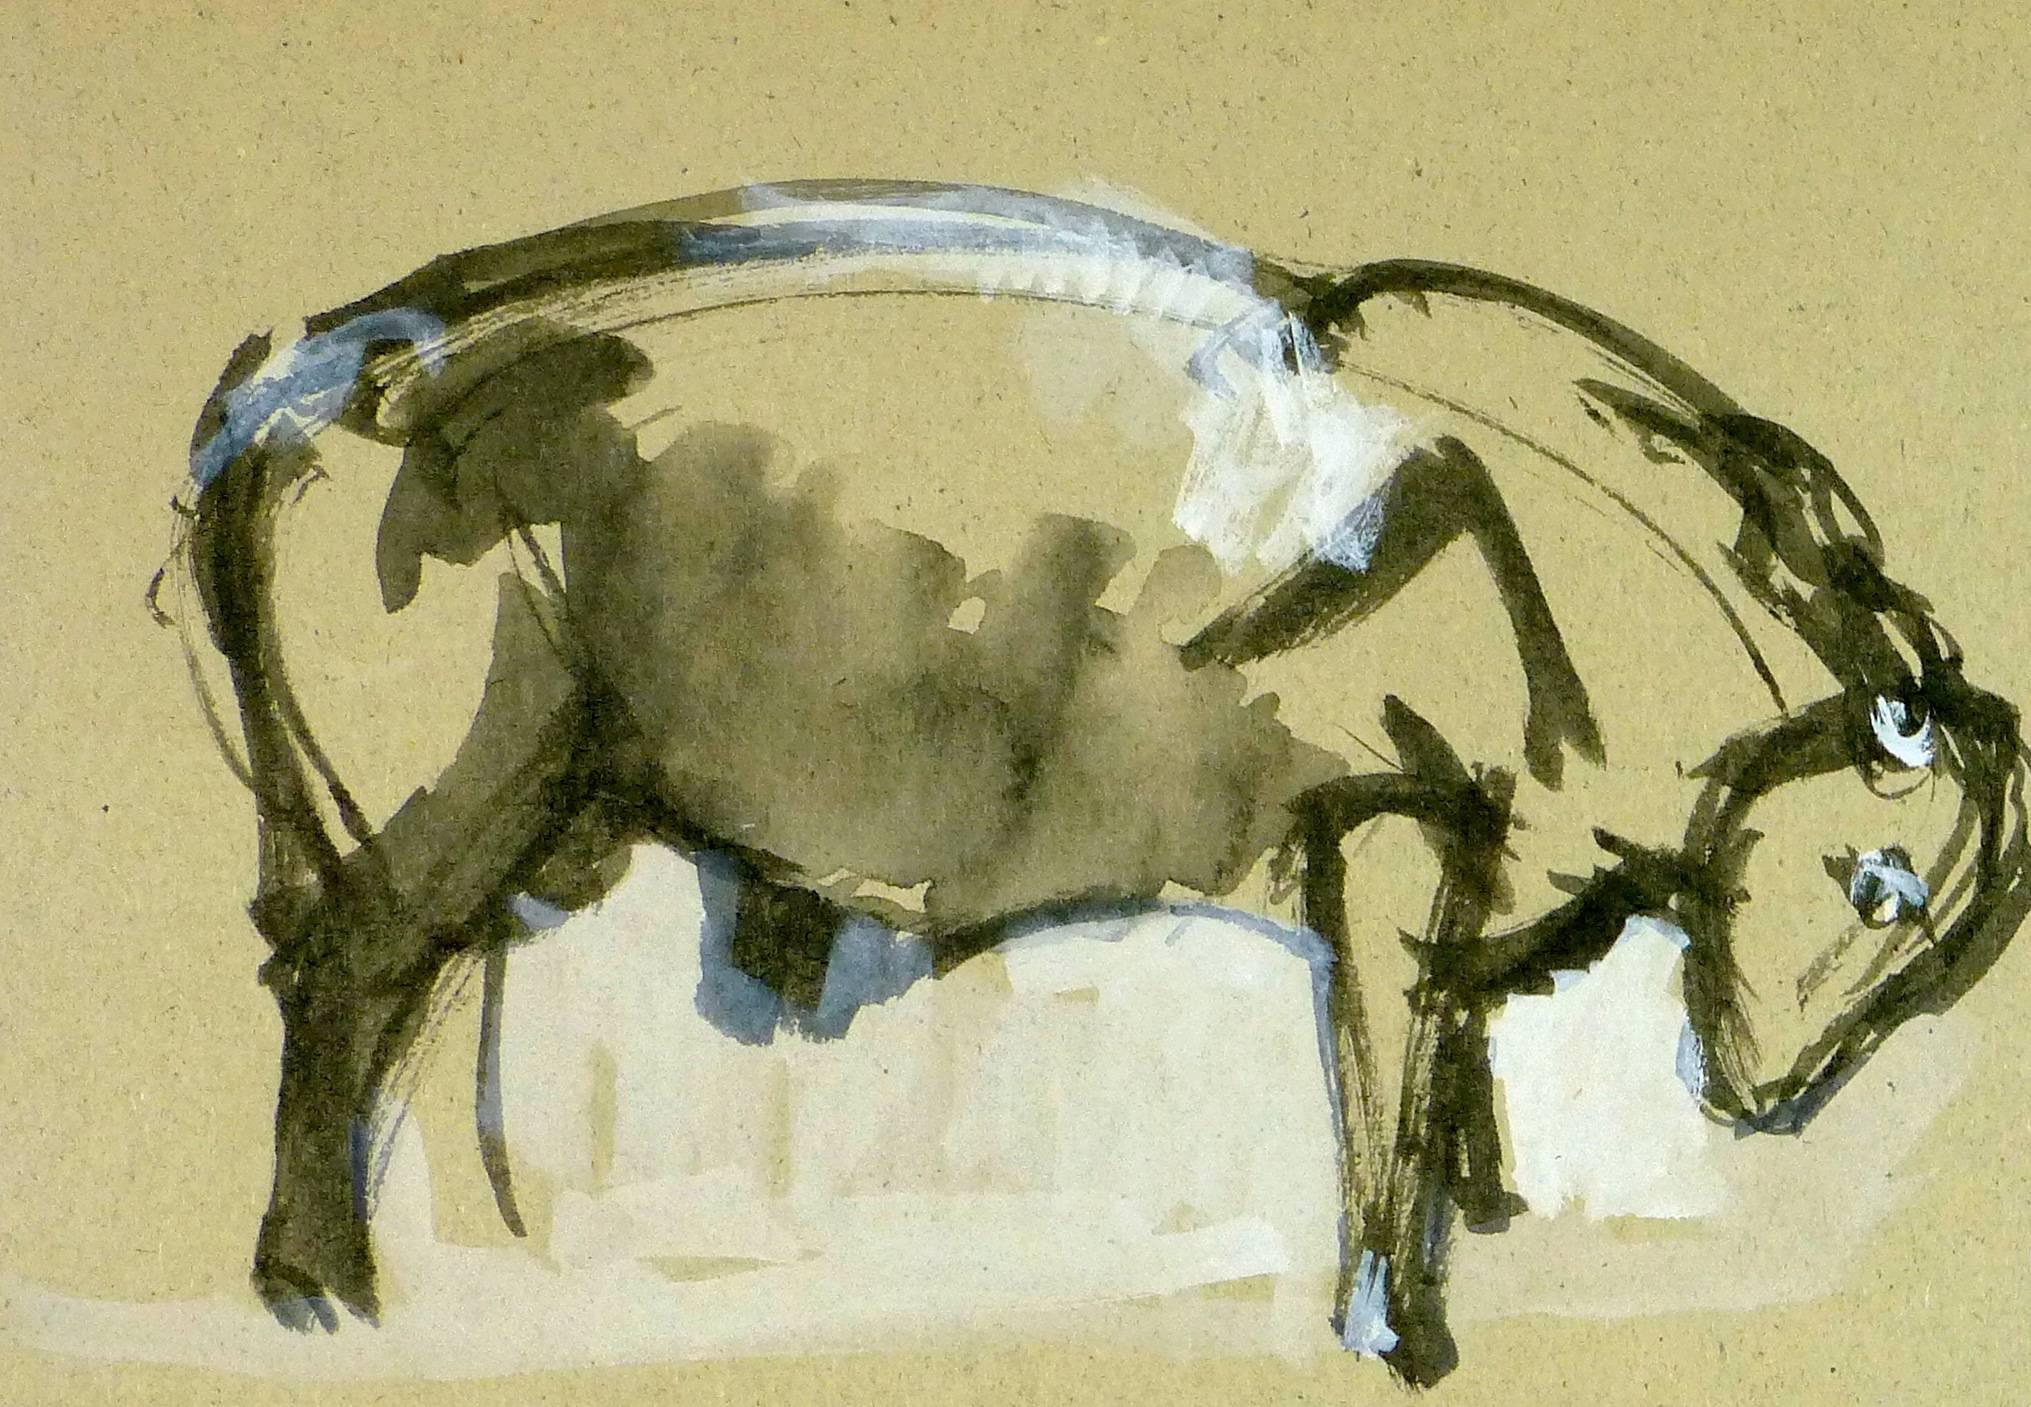 Black & White Ink Wash of Cattle - Art by Unknown